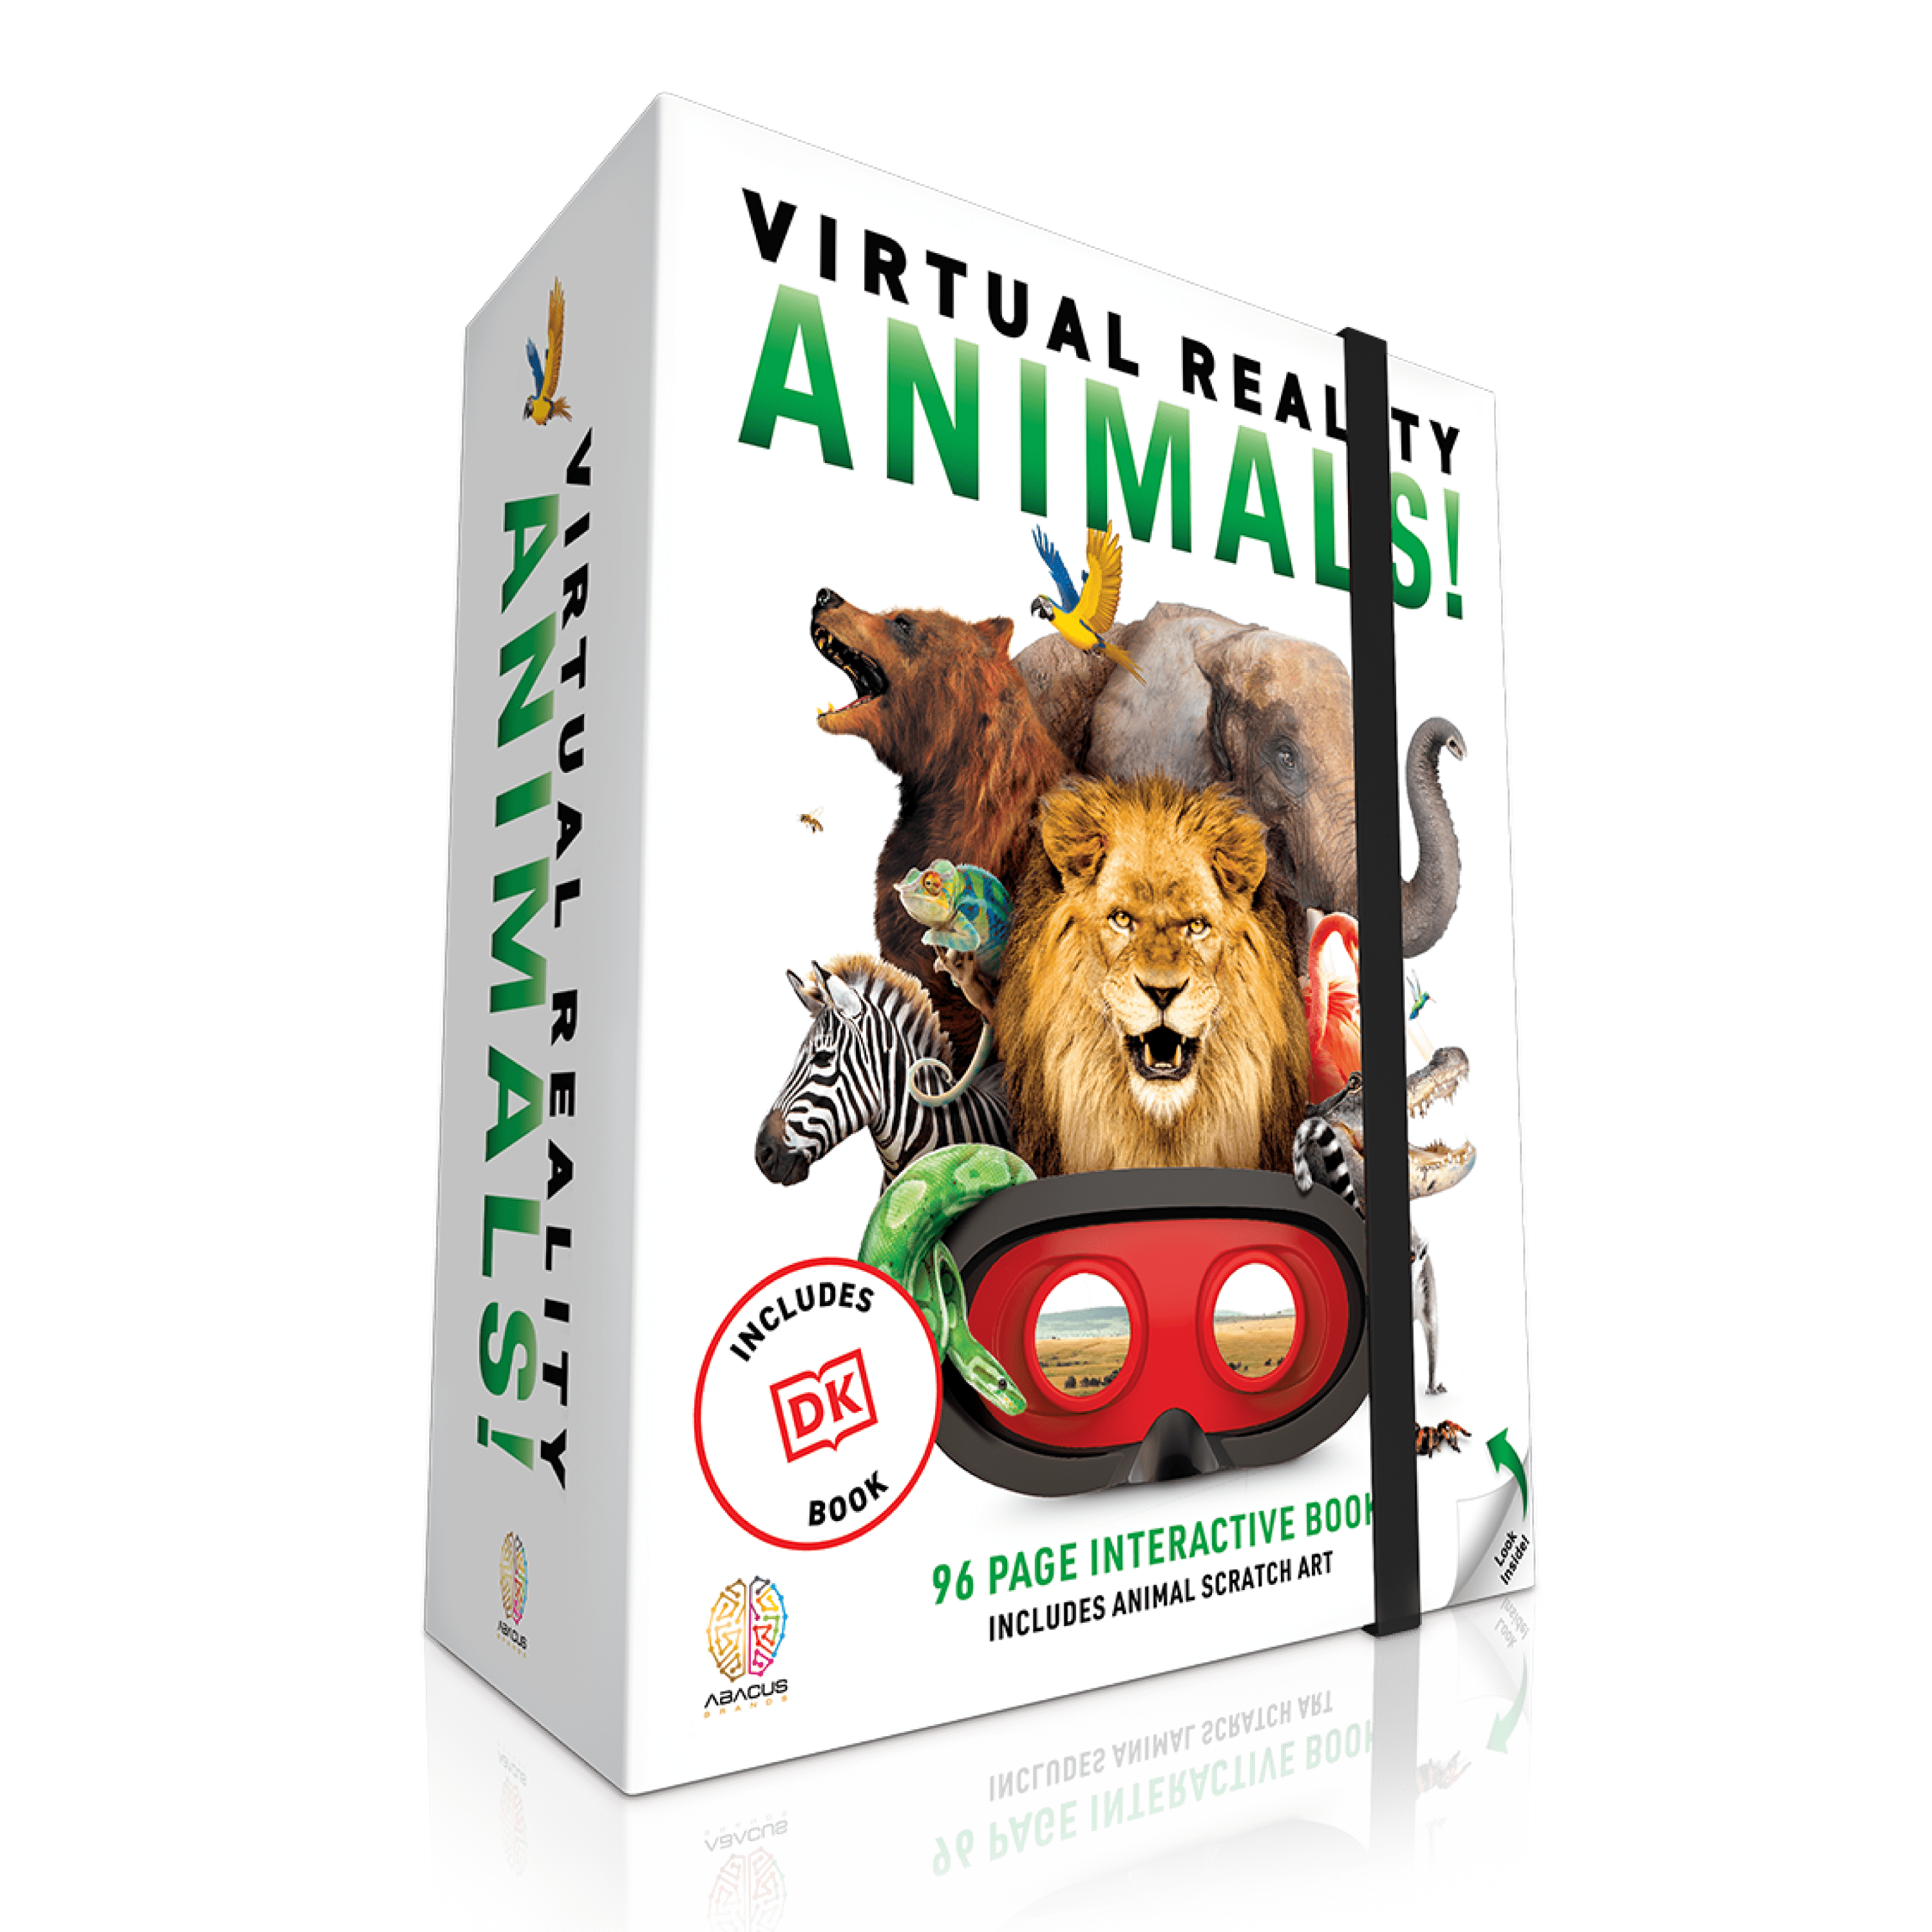 Virtual Reality Discovery Gift Set w/ DK Book - Animals!